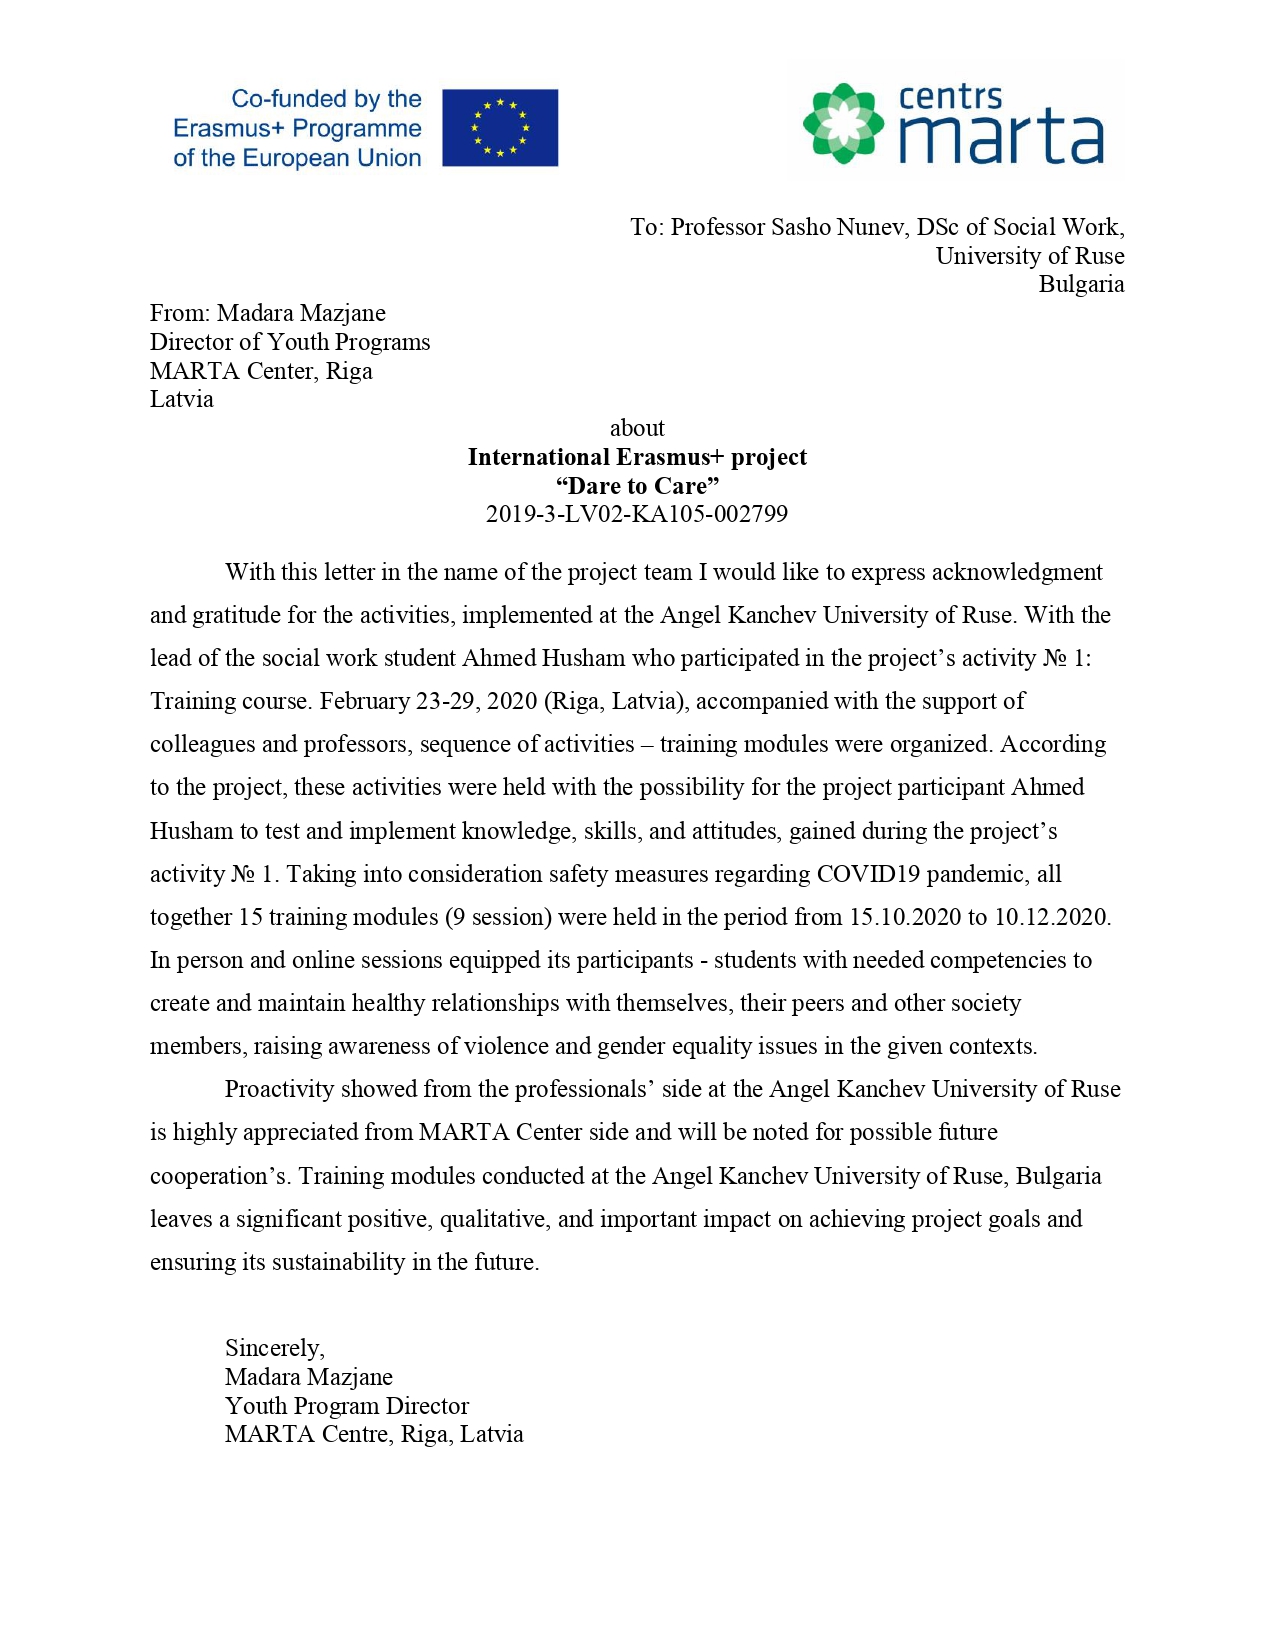 official letter_University of Ruse_MARTA_page-0001.jpg